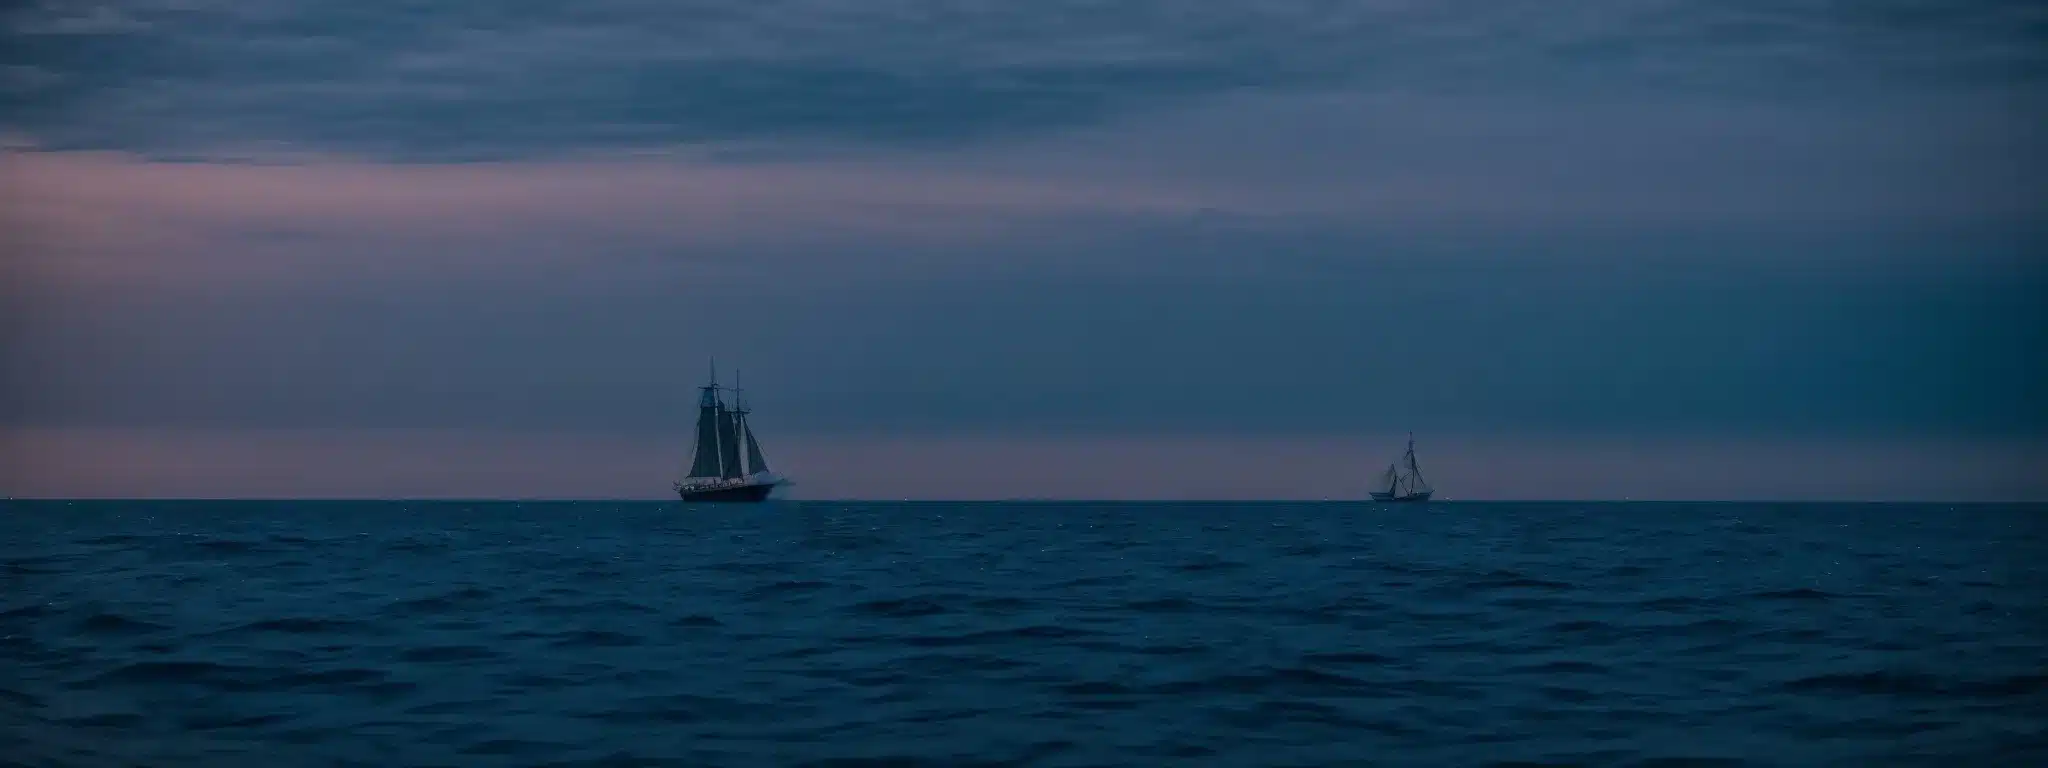 A Sailing Ship On The Open Sea At Twilight, With A Clear View Stretching Towards A Horizon Glowing With The Last Light Of Day.